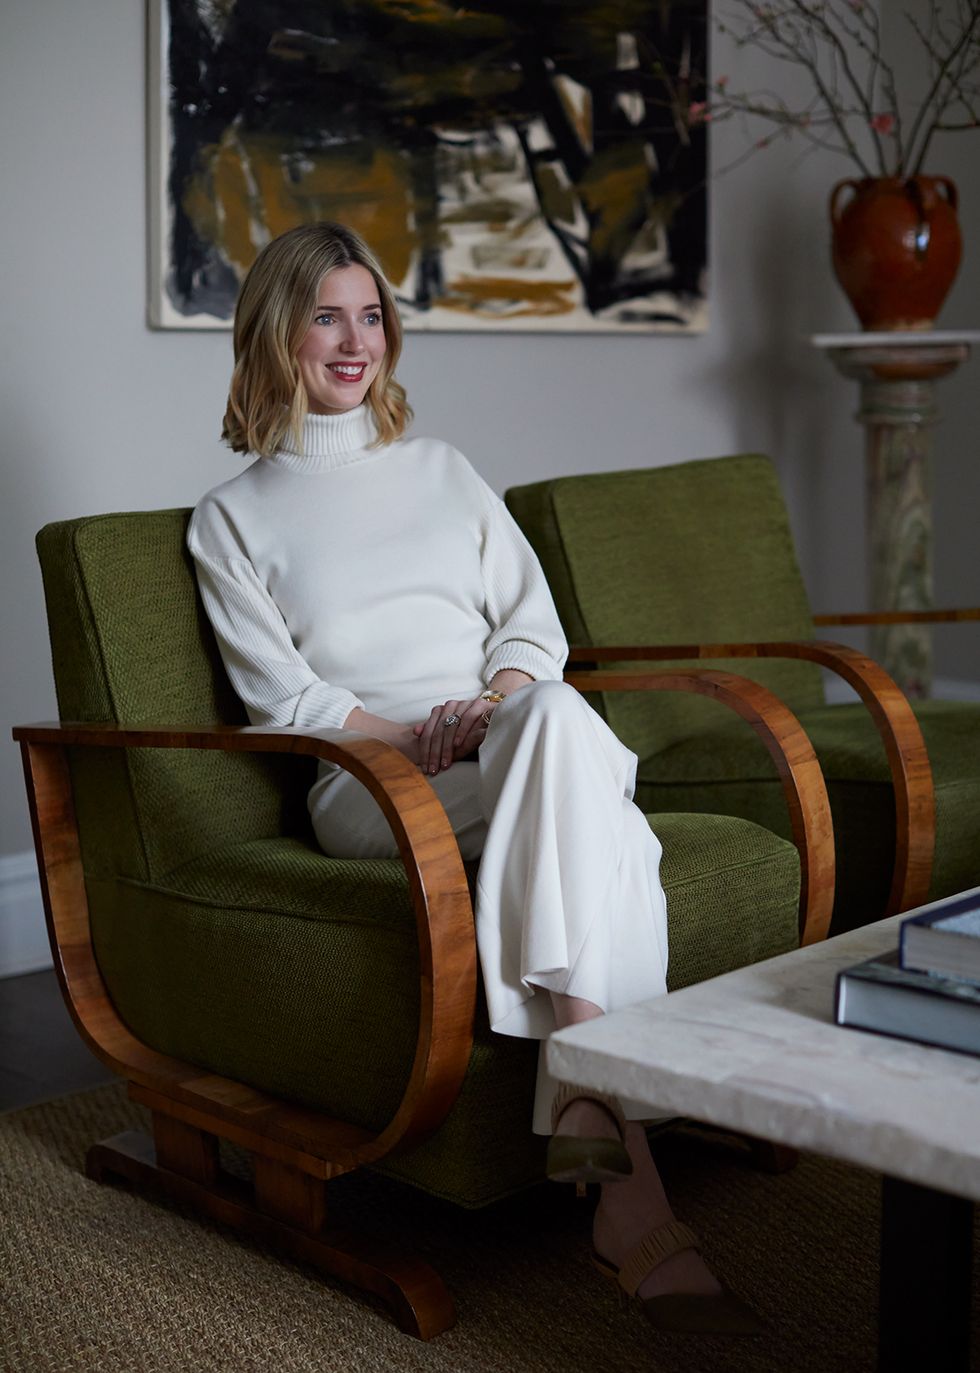 smiling designer waring all white turtleneck and flair pants sitting in a green armchair